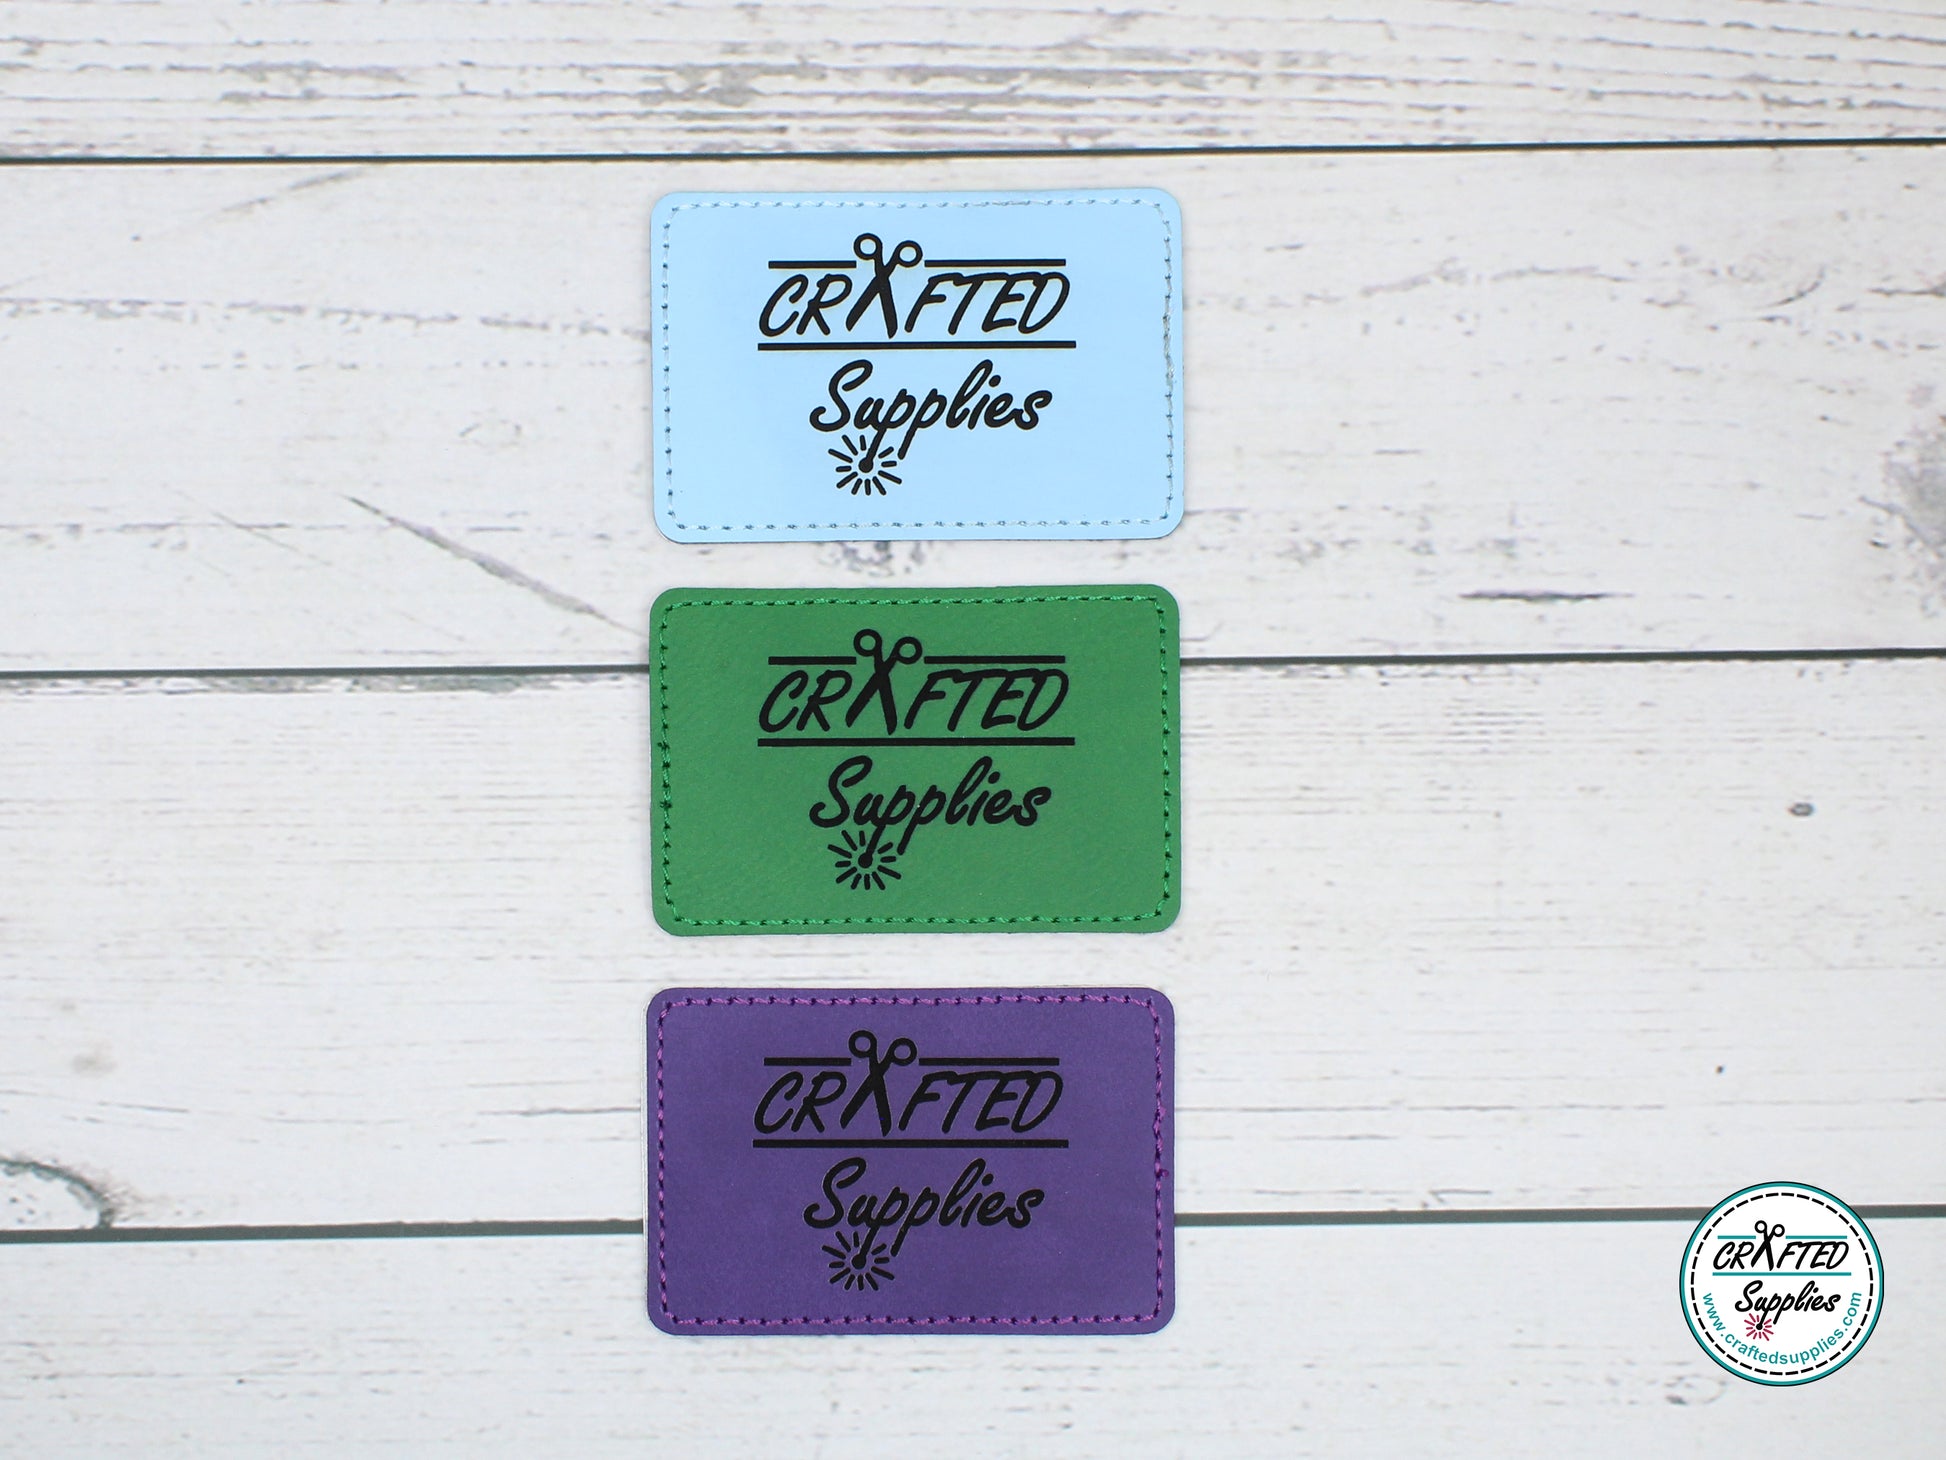 Leatherette Patch with adhesive – CraftedSupplies